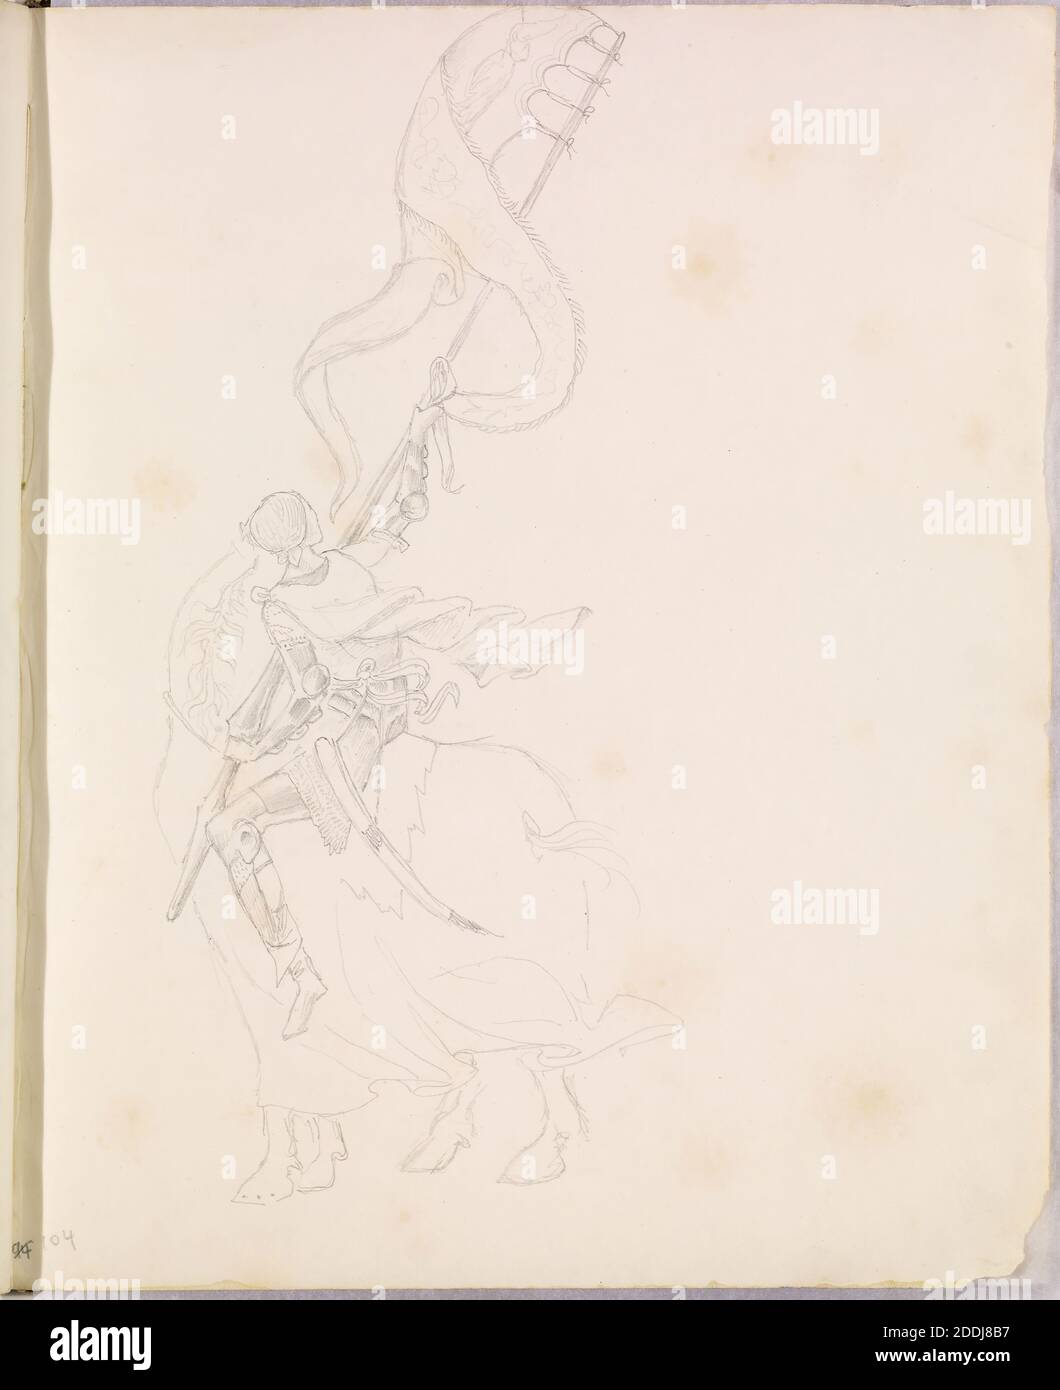 Sketchbook of Byzantine and Romanesque Decoration, 1887-1894 Study of a Medieval knight on horseback carrying a standard Sir Edward Burne-Jones, 110 sketches of Mediaeval and Byzantine decoration made in connection with studies for the 'Holy Grail' tapestries for Morris & Co., Art Movement, Pre-Raphaelite, Pencil, Sketch Stock Photo